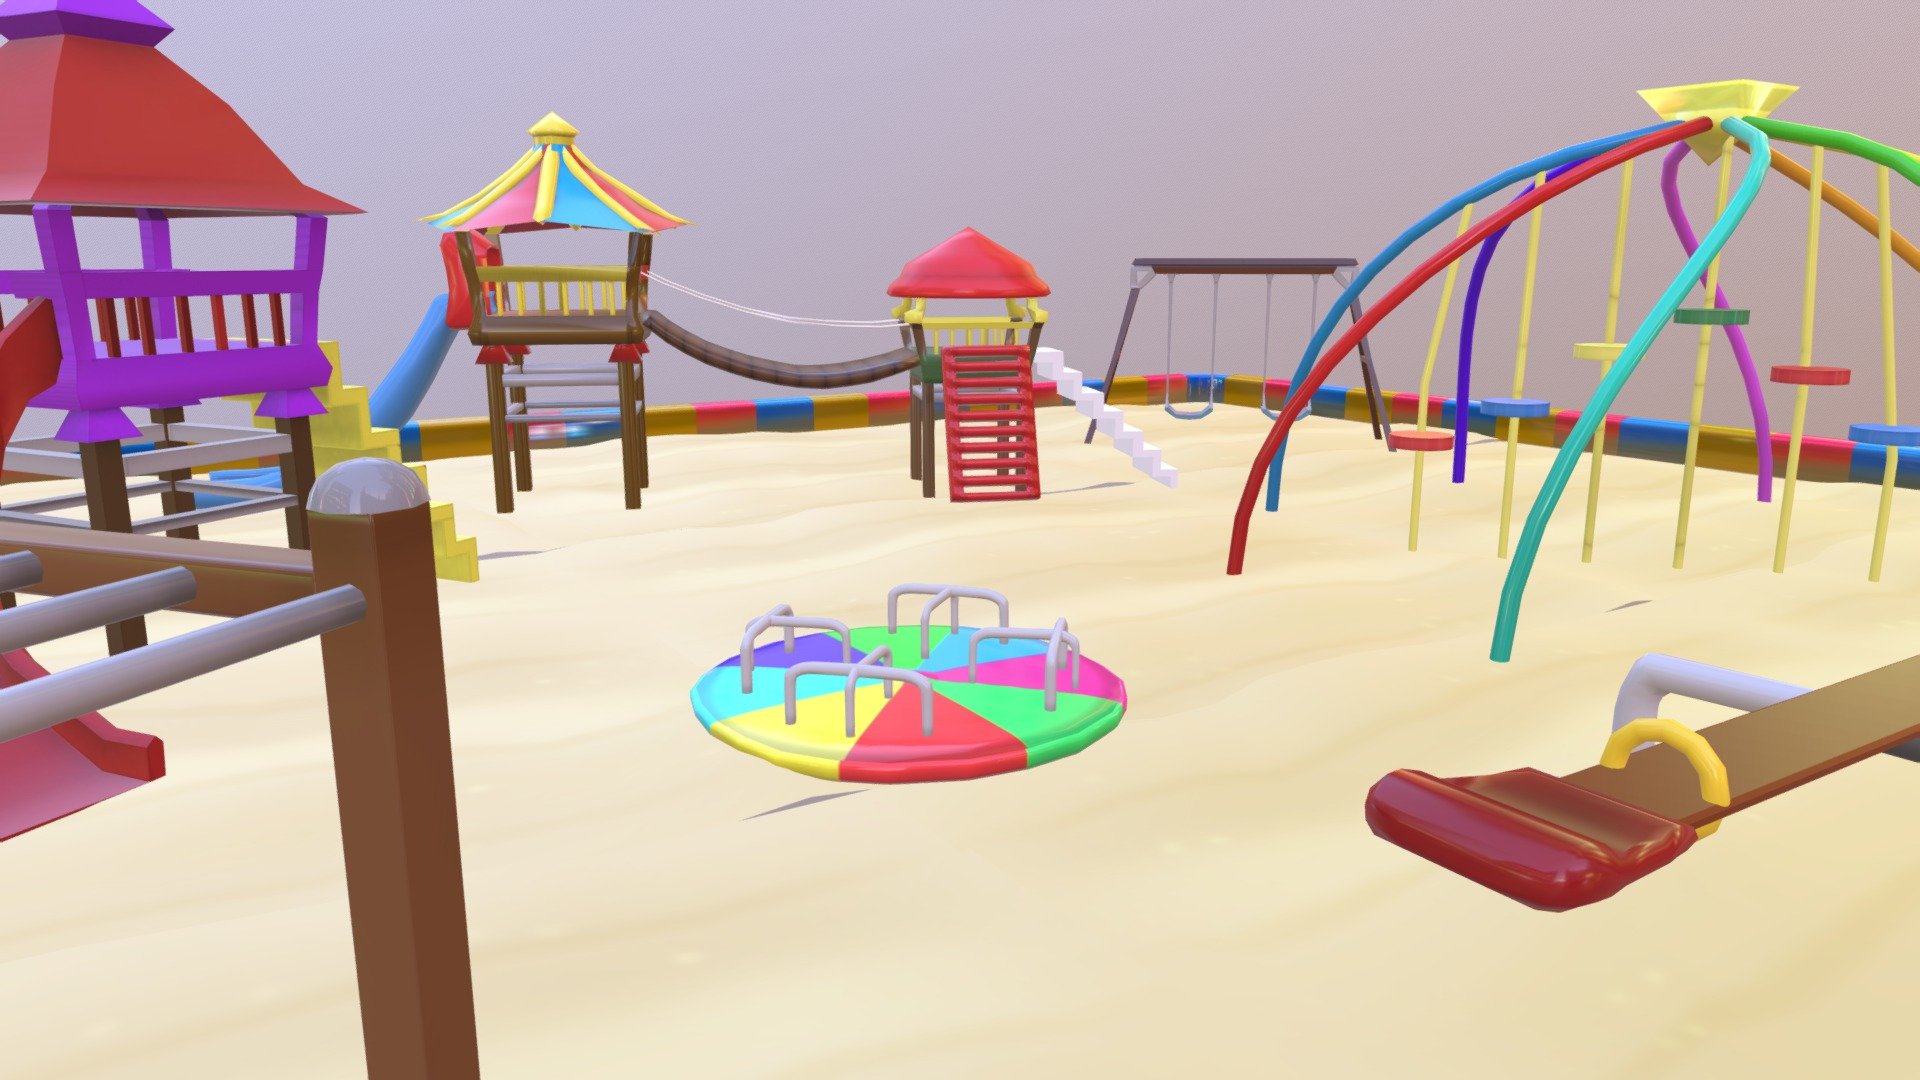 Props I modeled for a game I worked on with a team

Someone else from the team textured all of these except for the sand and playground borders - Playground - 3D model by glittermocha 3d model